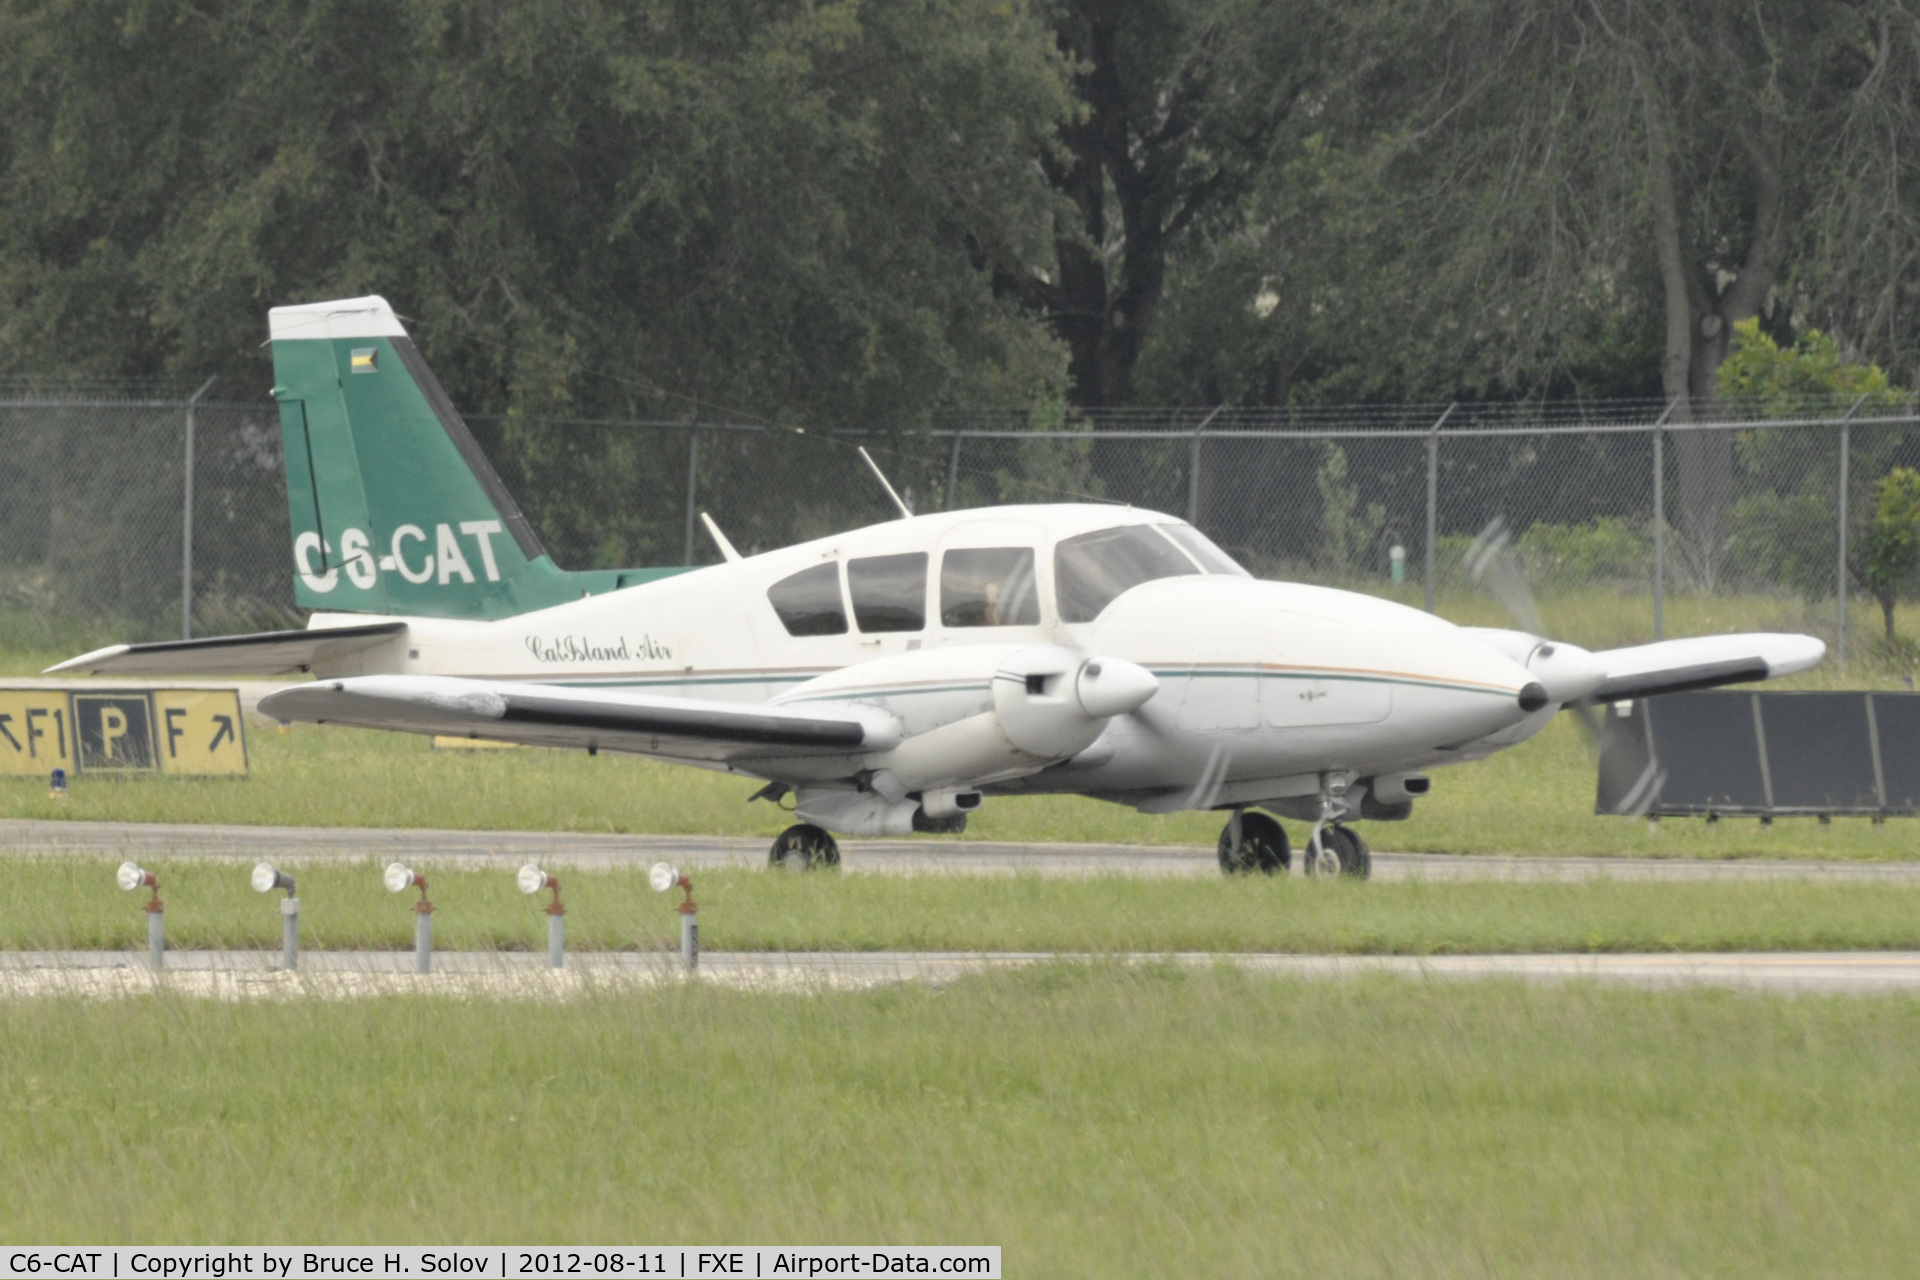 C6-CAT, Piper PA-23-250 C/N 27-7554083, Ready for takeoff on runway 8